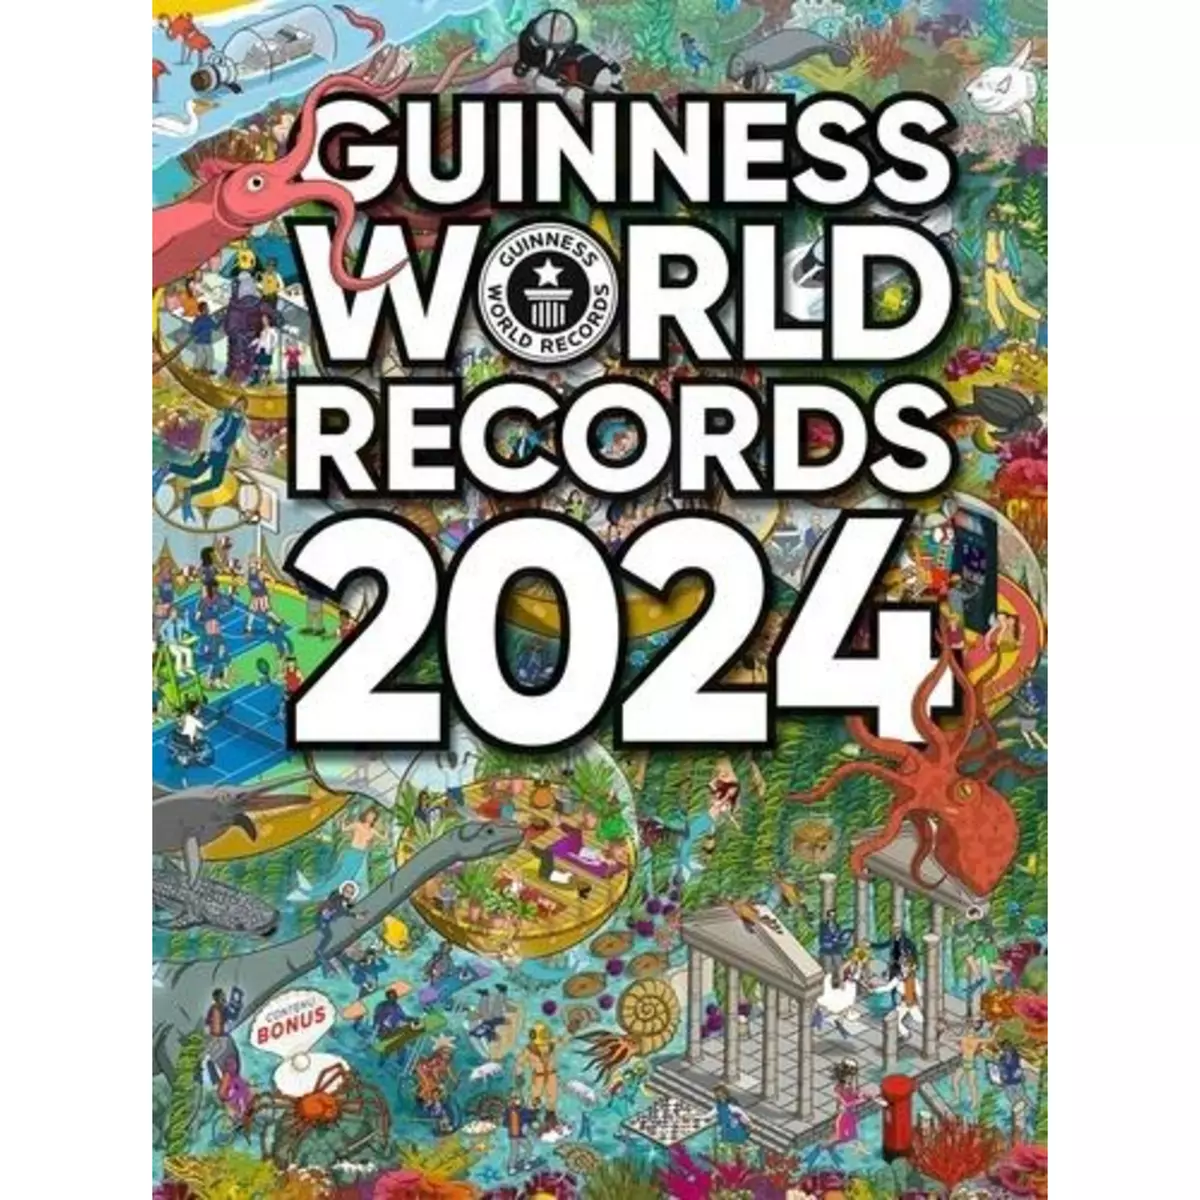  GUINNESS WORLD RECORDS. EDITION 2024, Guinness World Records